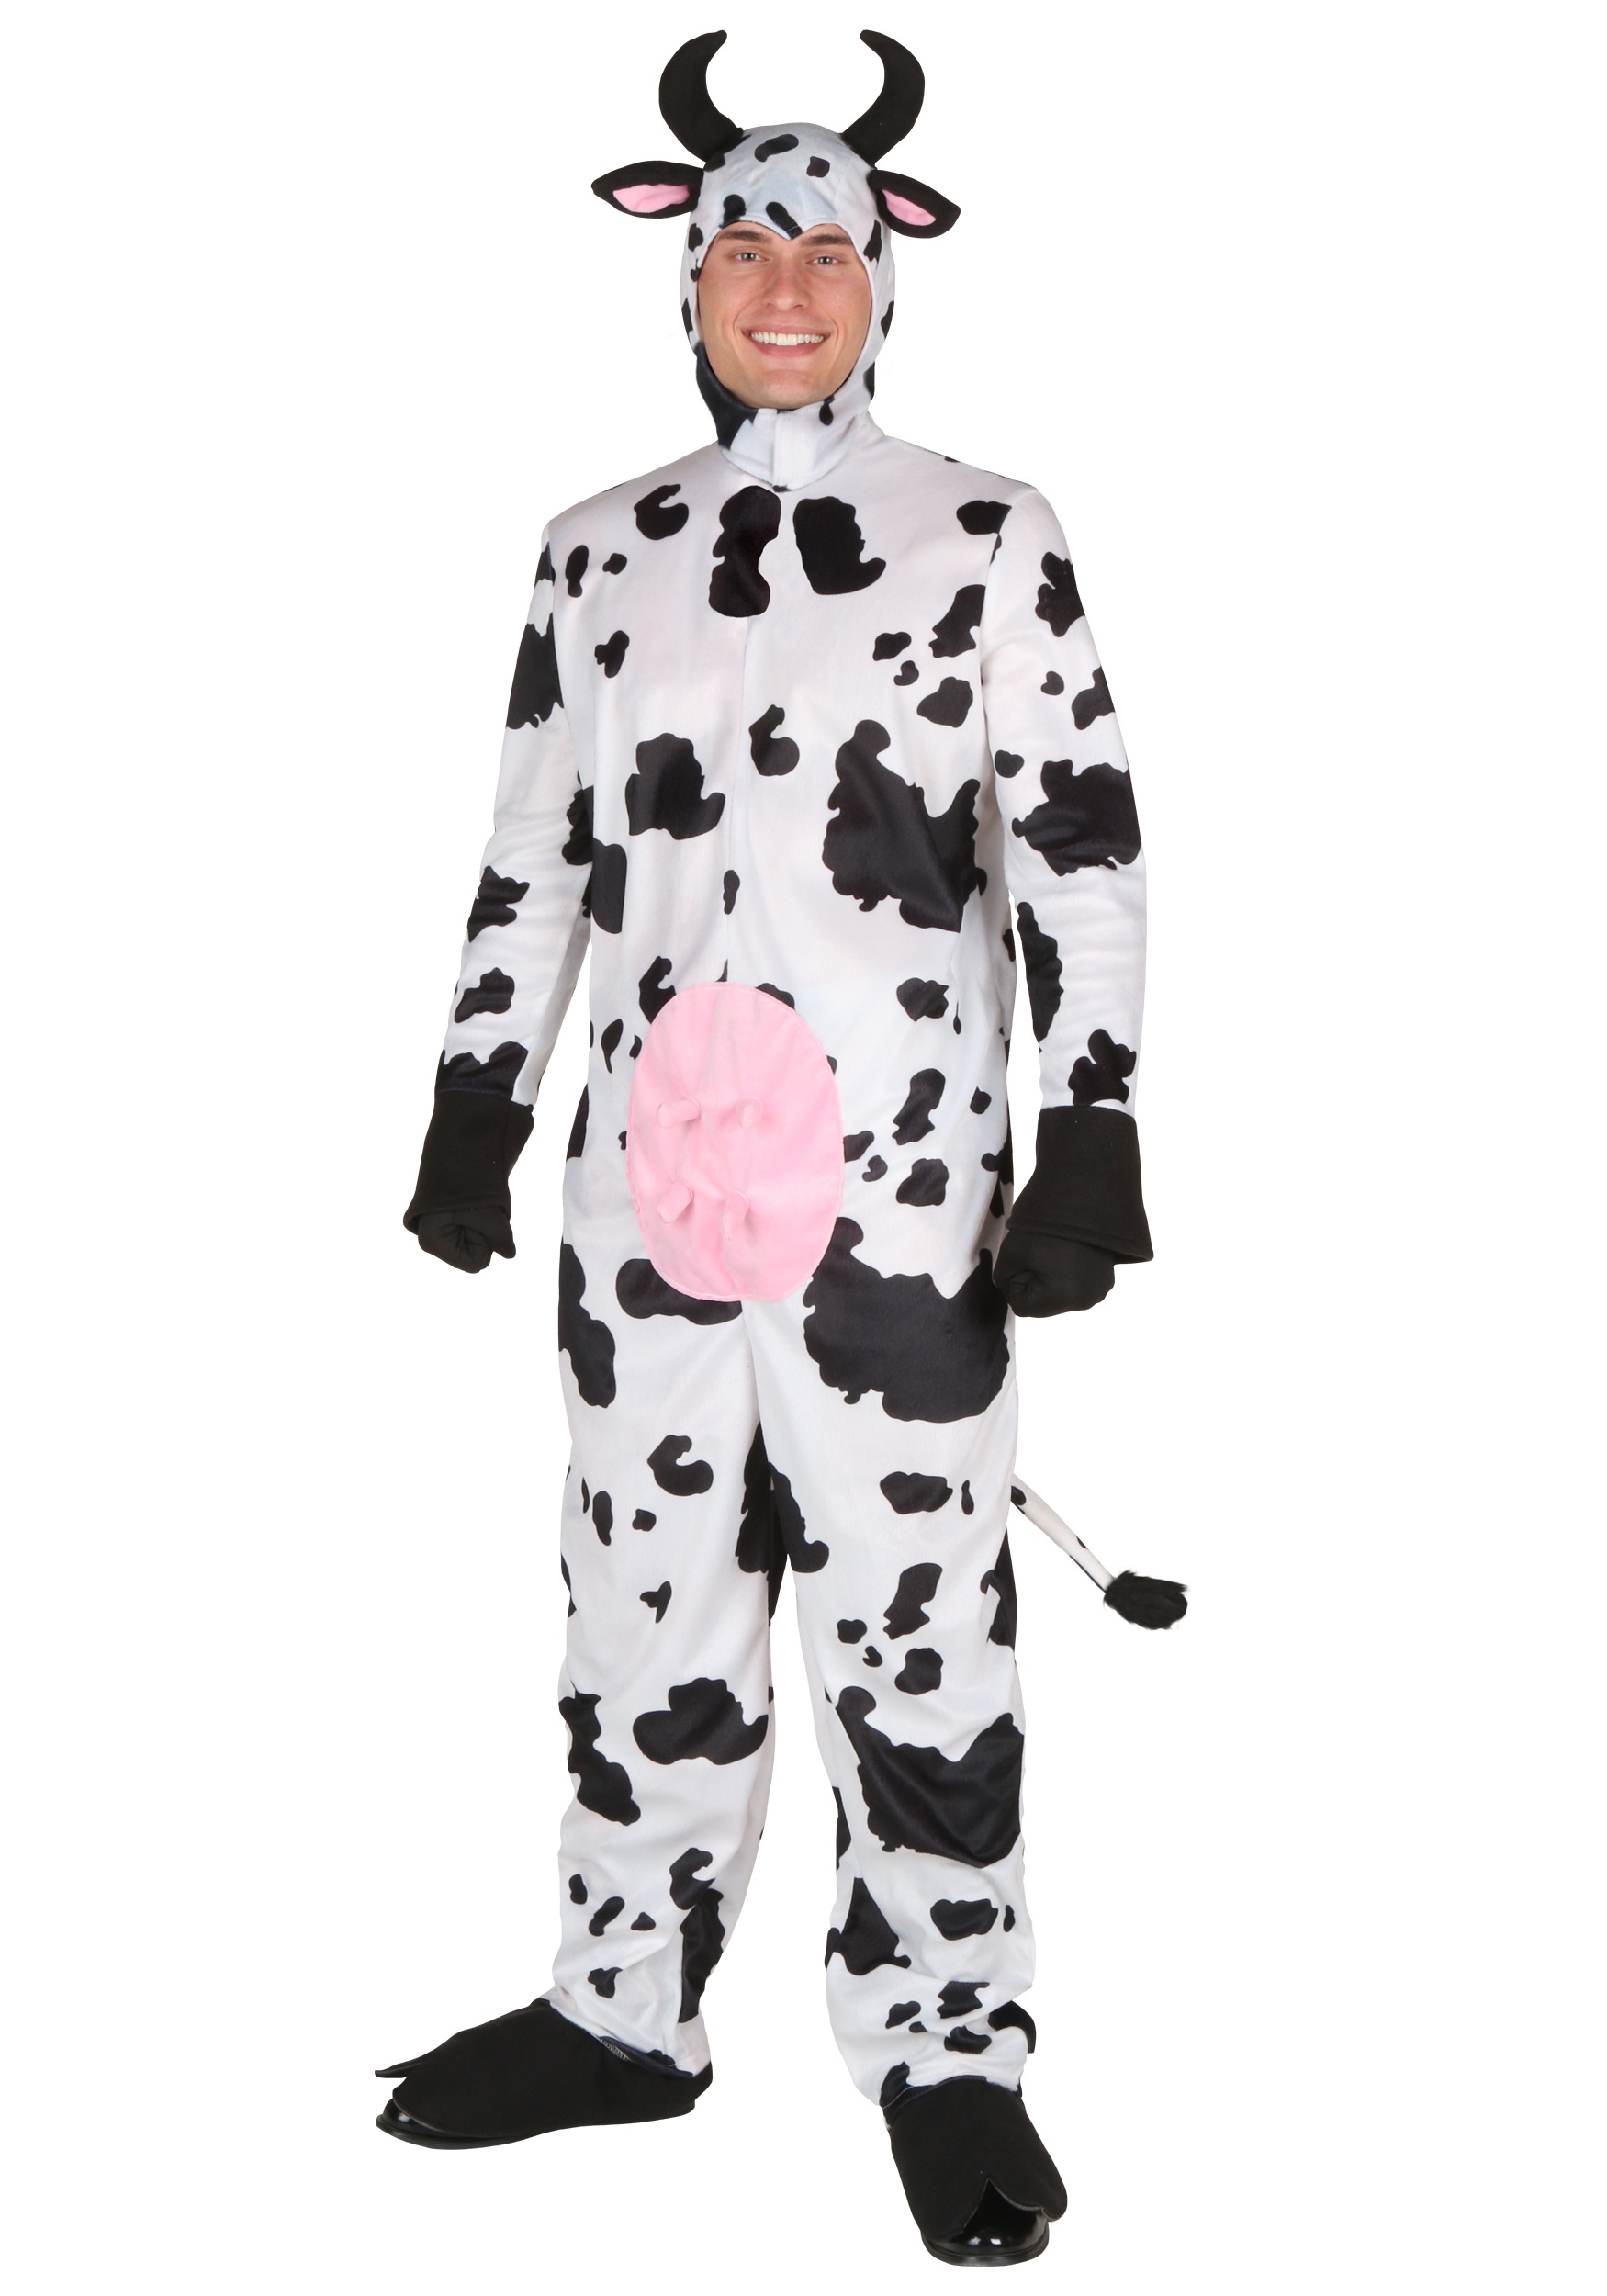 Photos - Fancy Dress Deluxe FUN Costumes  Cow  Costume for Adults Black/White FUN 